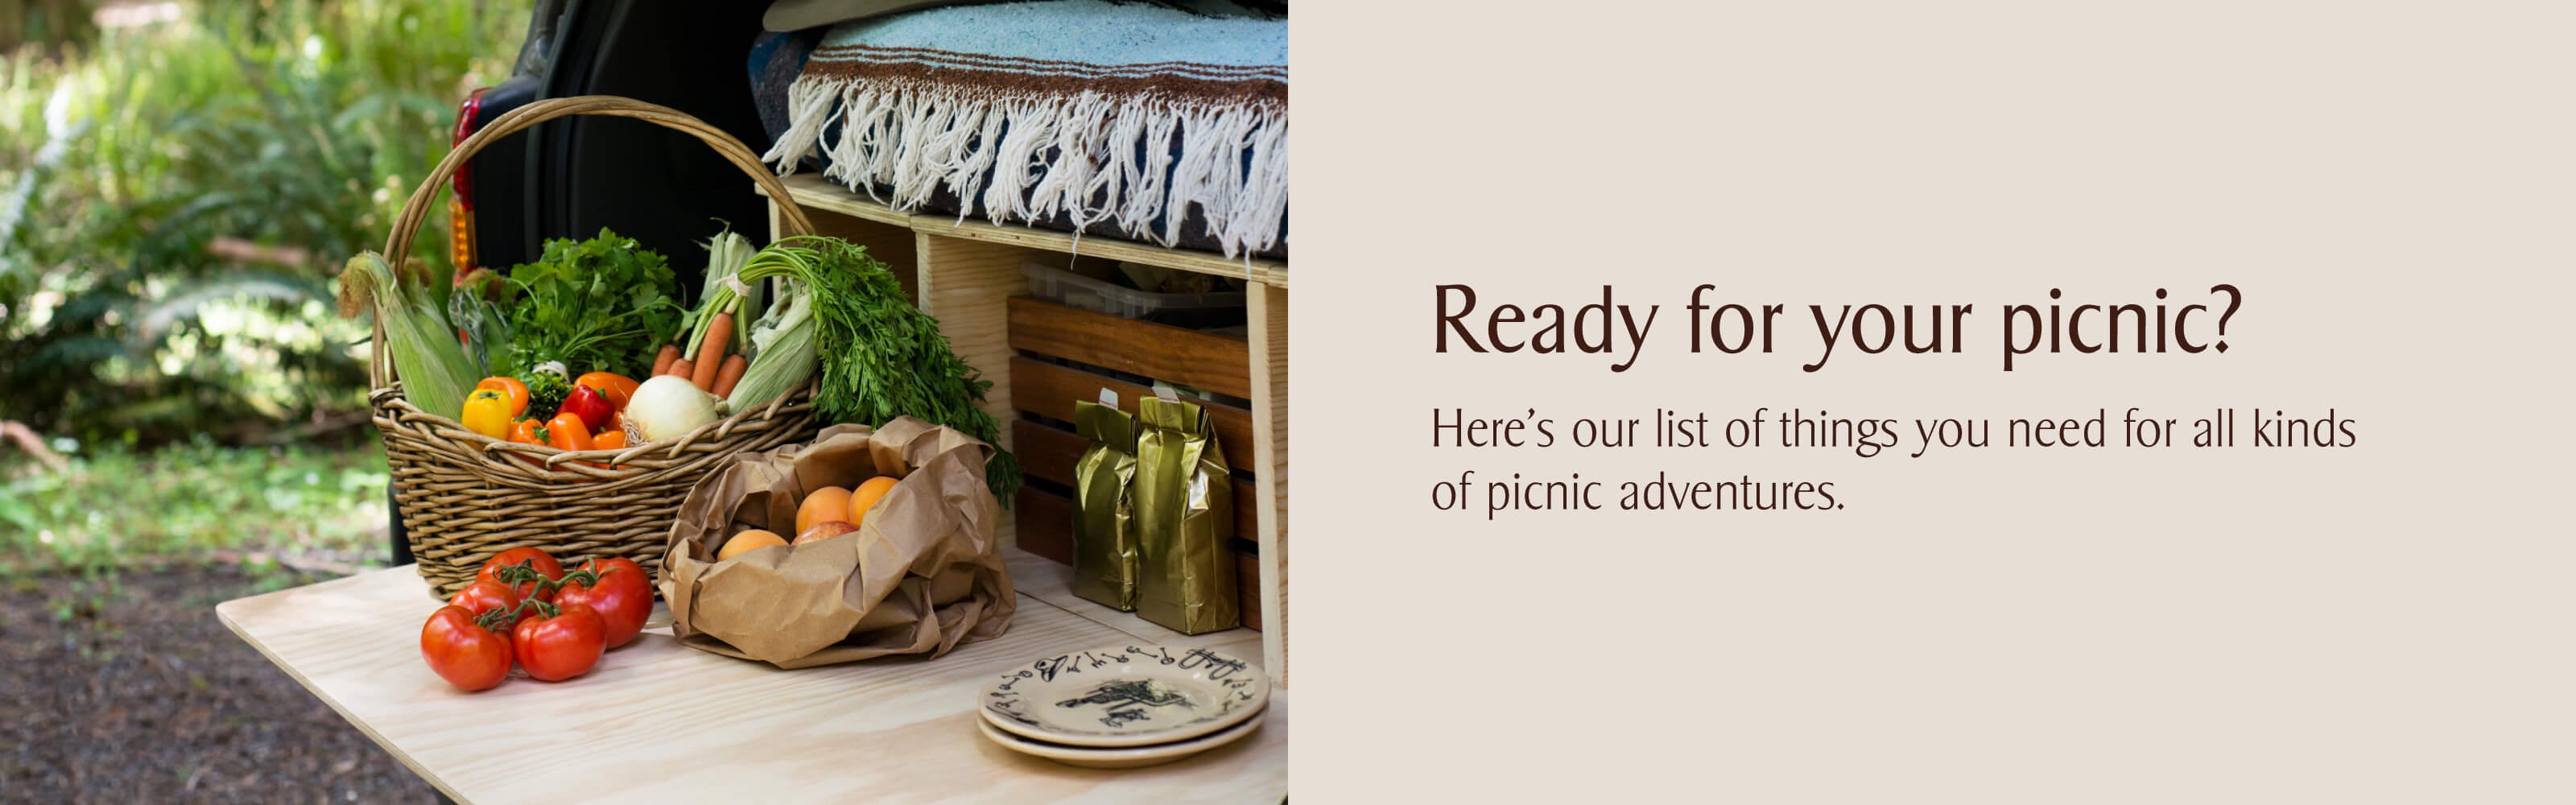 Ready for your picnic?